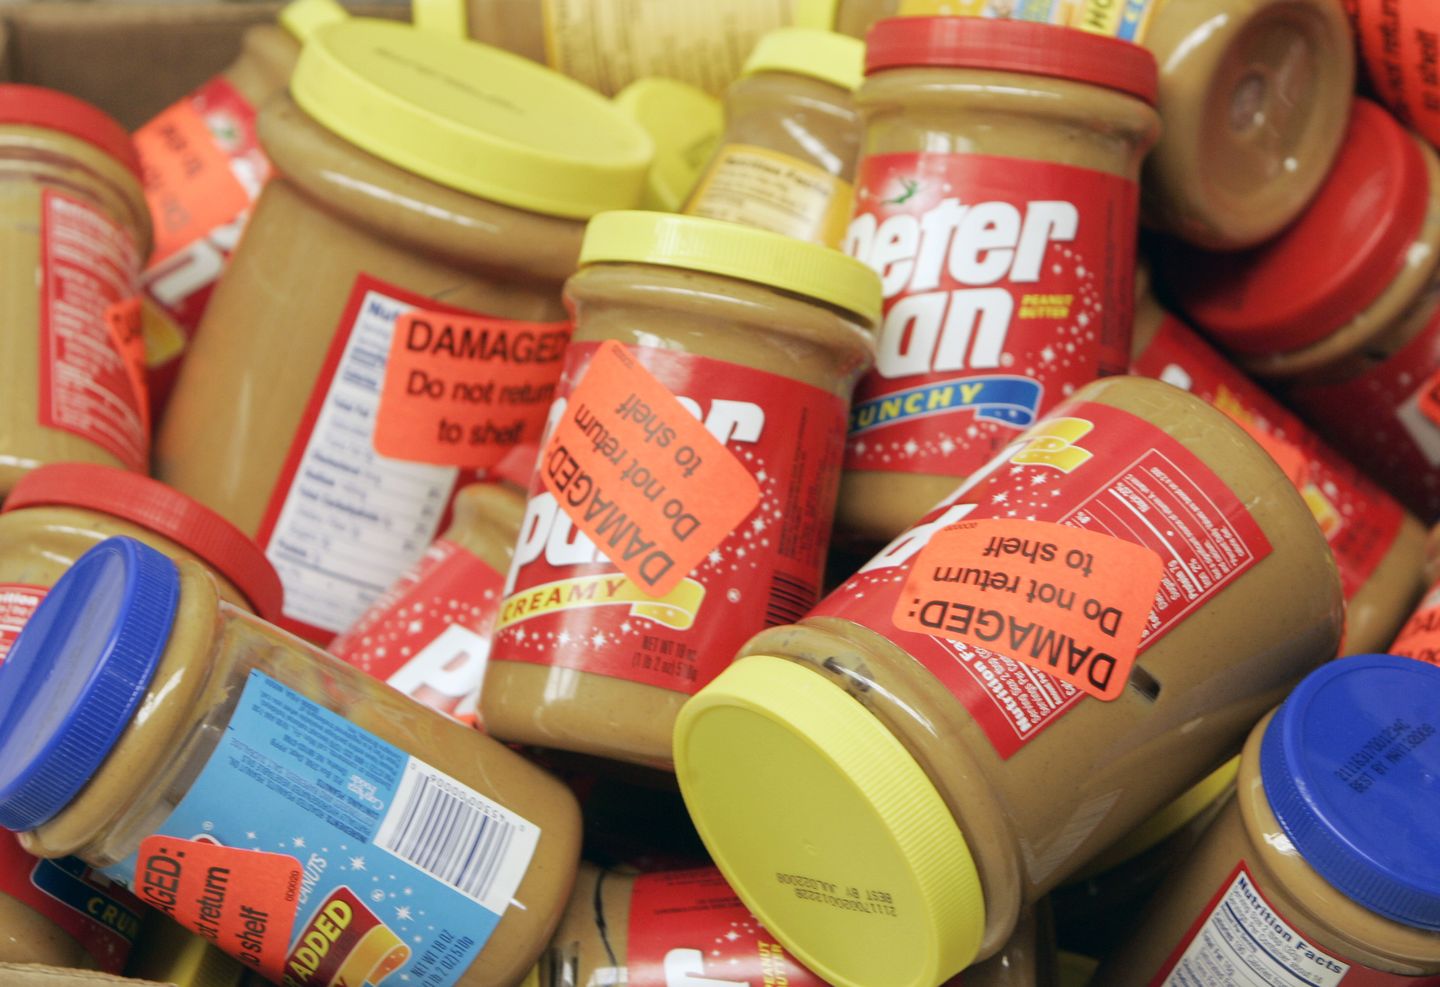 Some Jif peanut butter products linked to salmonella cases